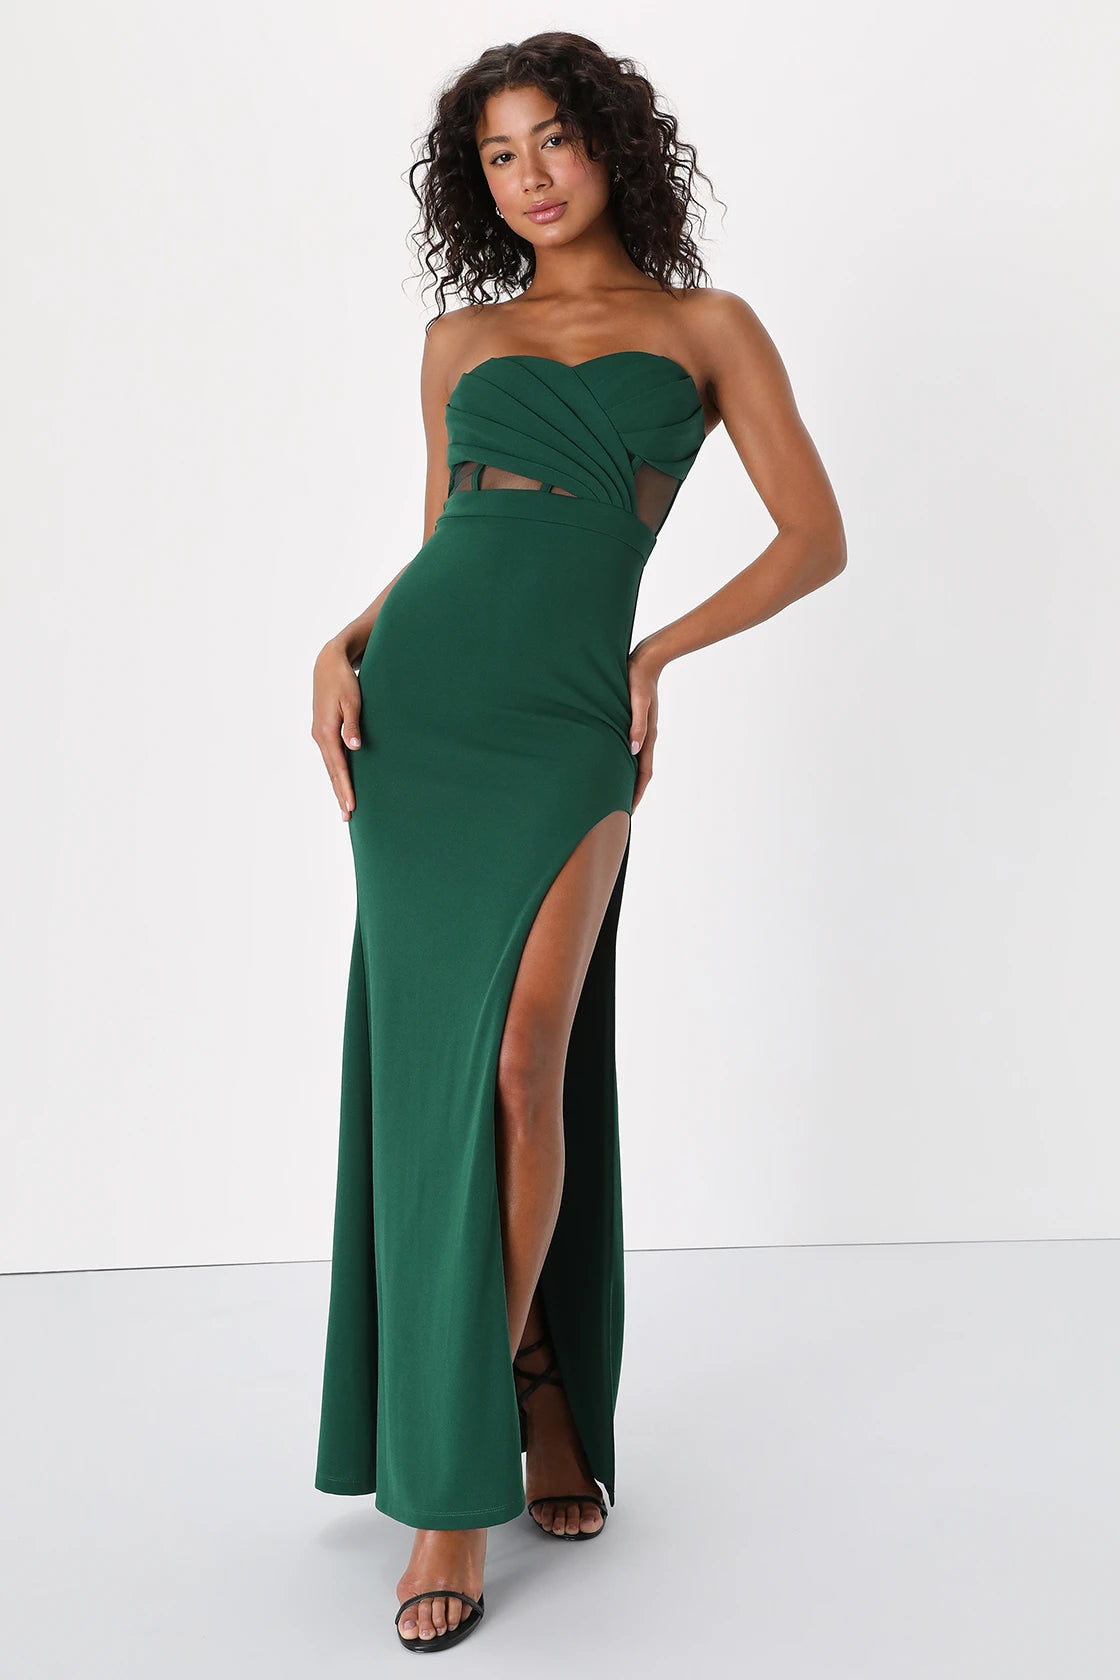 Front view of a woman wearing an Emerald Green Pleated Strapless Bustier Dress by LuLu's